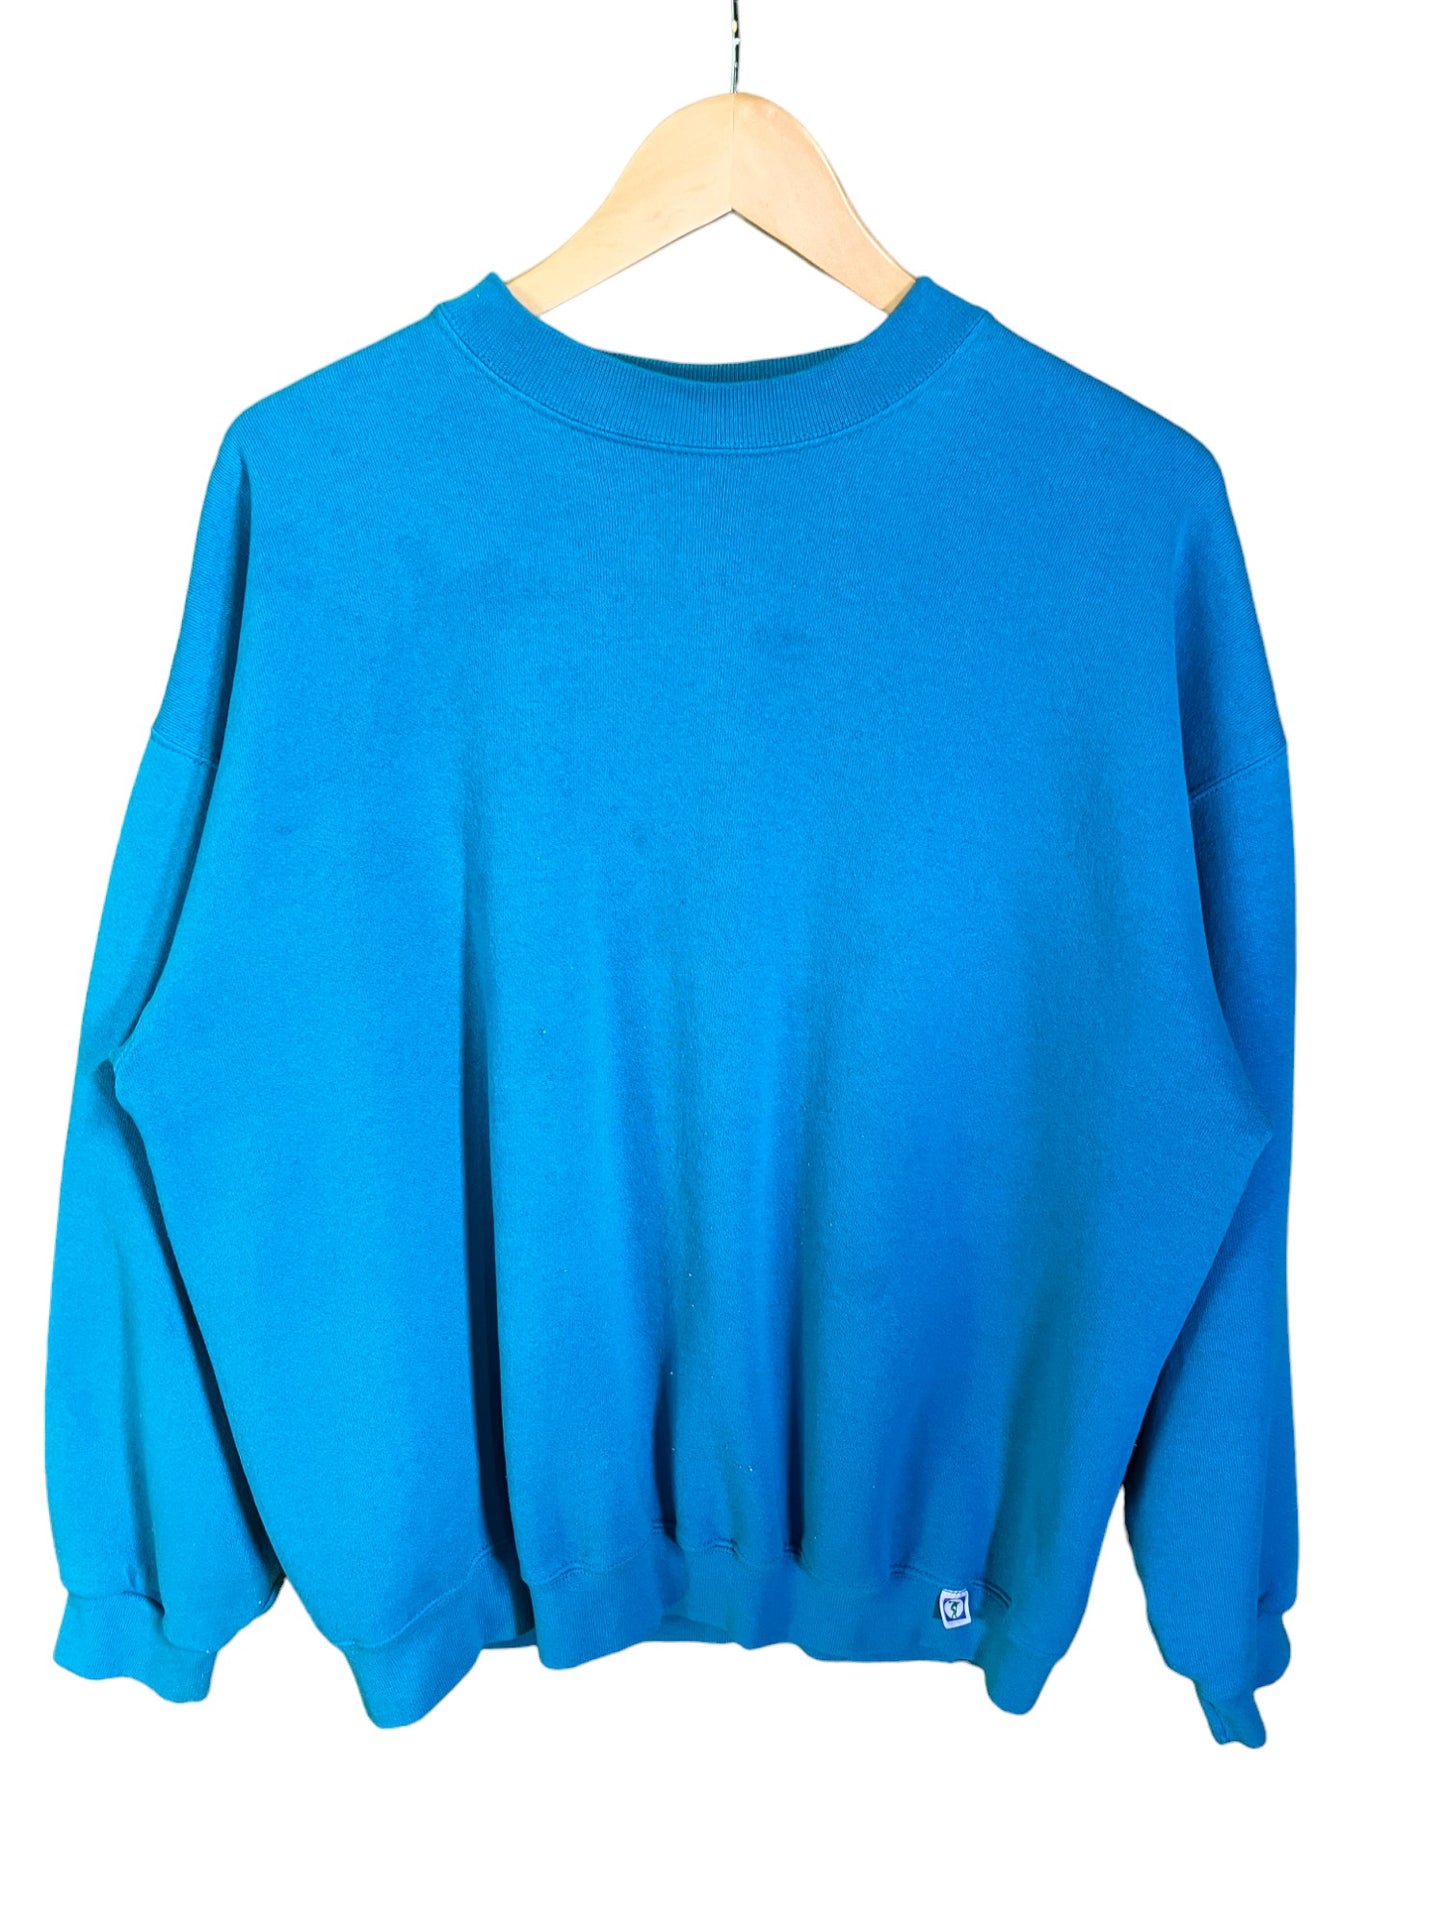 Vintage 90's Discus Athletic Blue Blank Crewneck Sweater Size Large